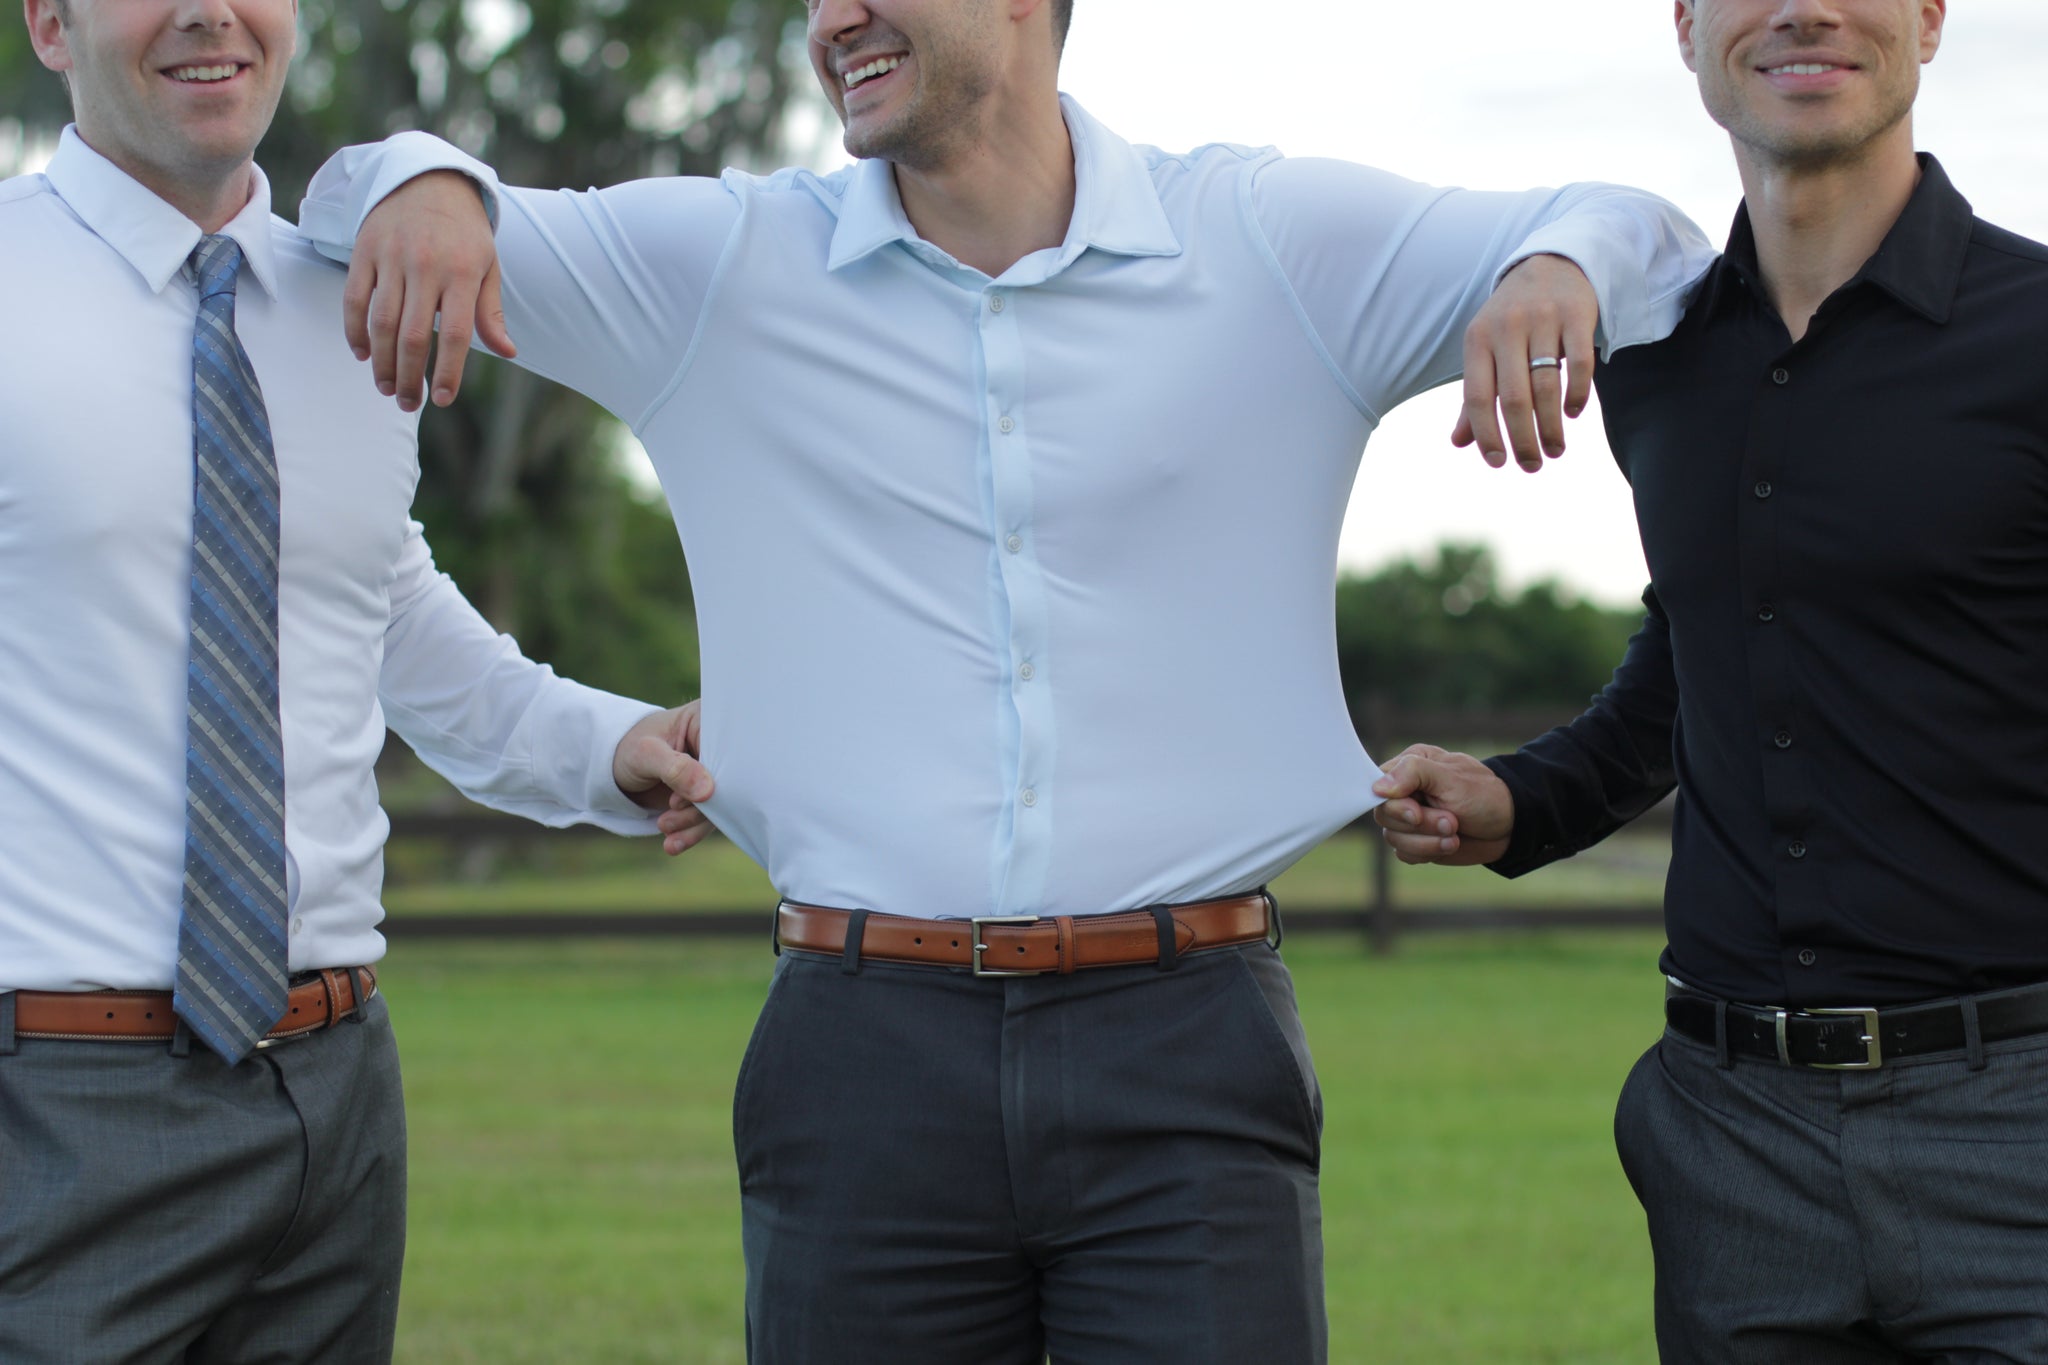 What's With Stretch Dress Shirts?